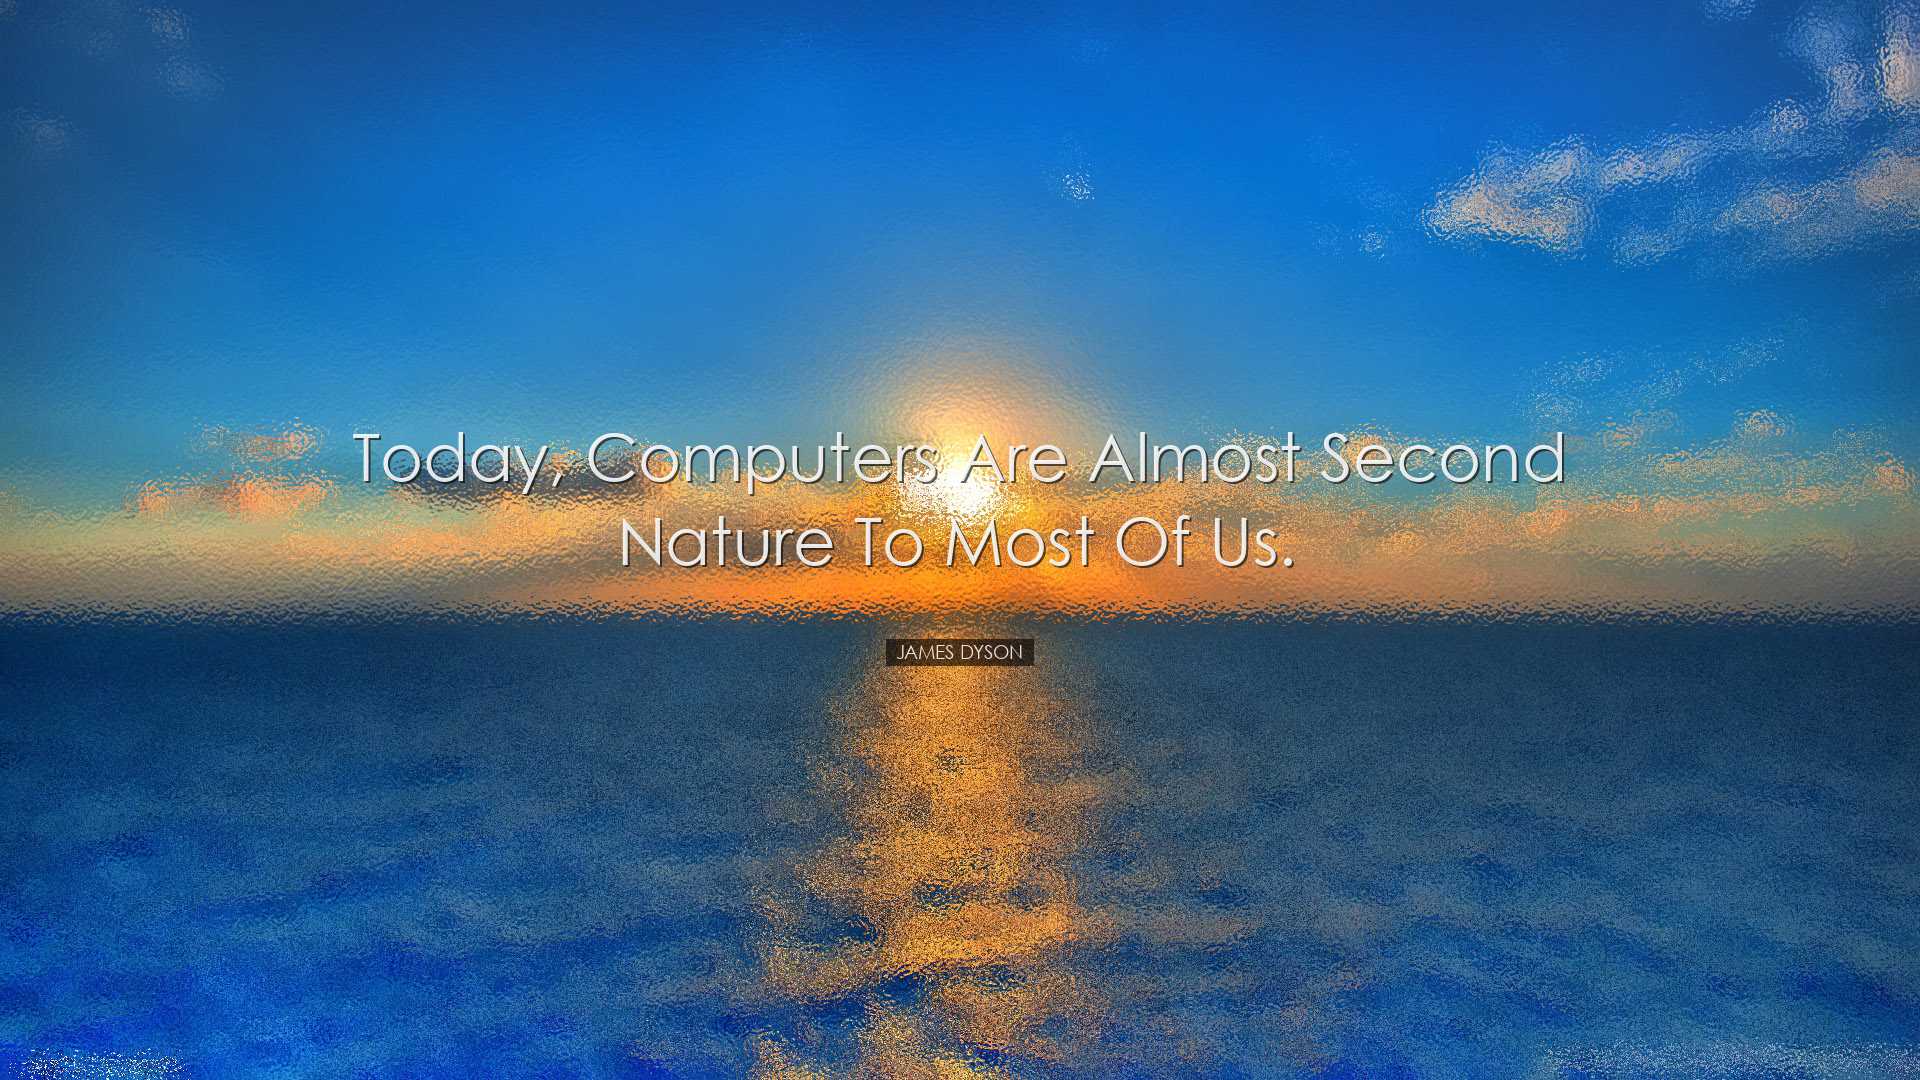 Today, computers are almost second nature to most of us. - James D